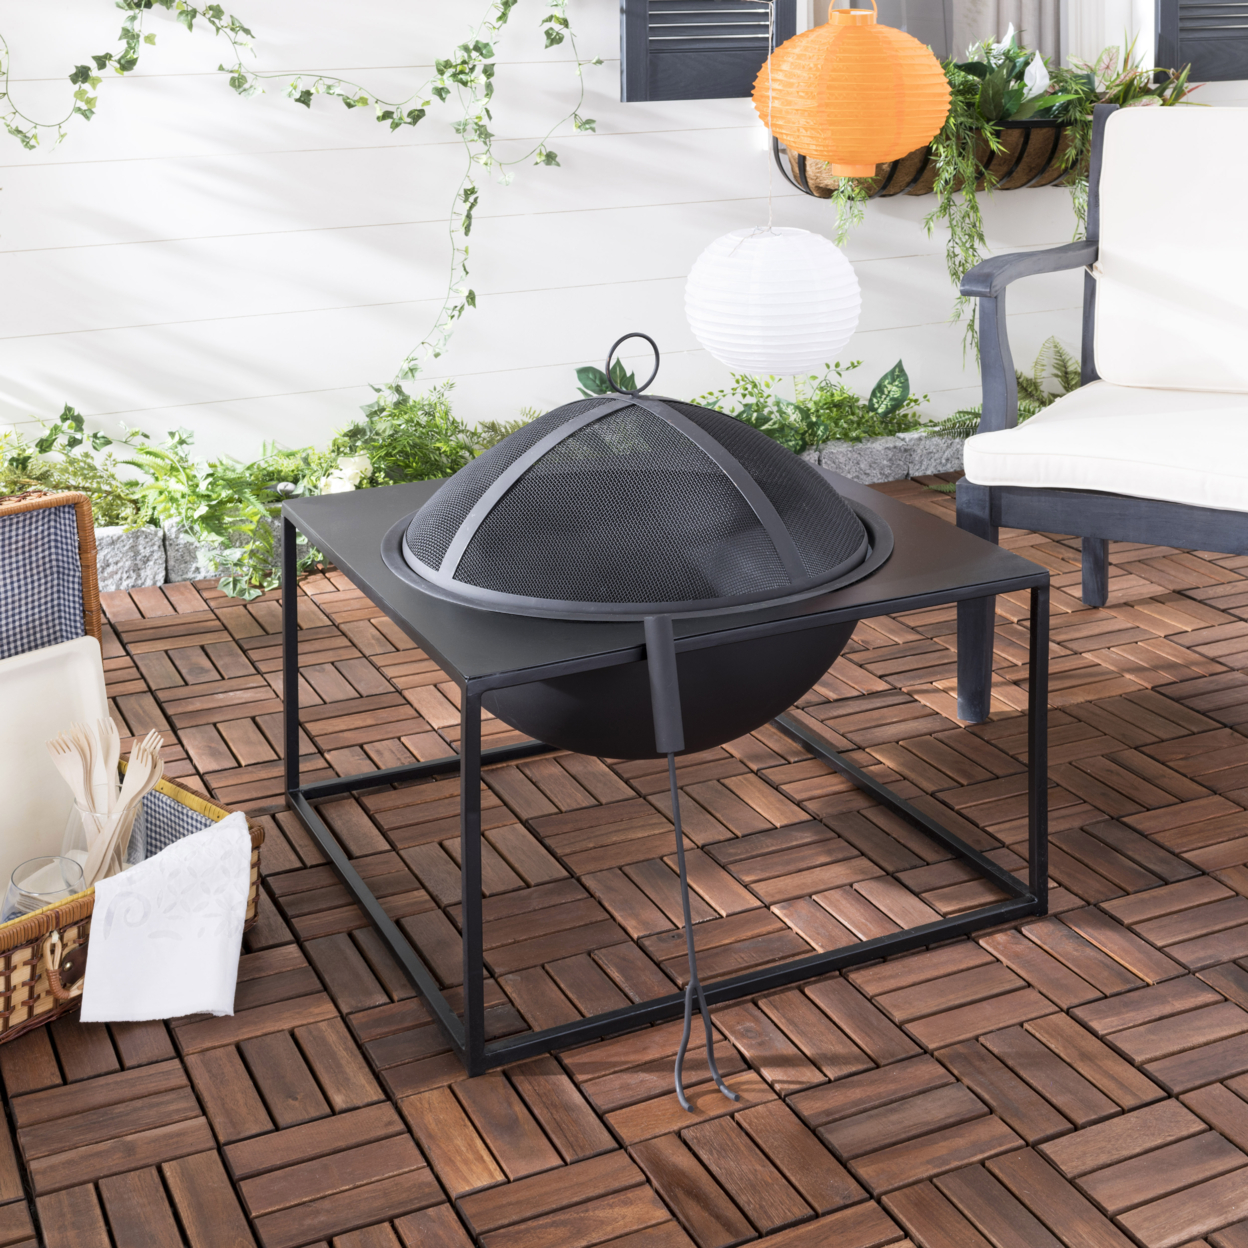 SAFAVIEH Outdoor Collection Leros Square Fire Pit Black